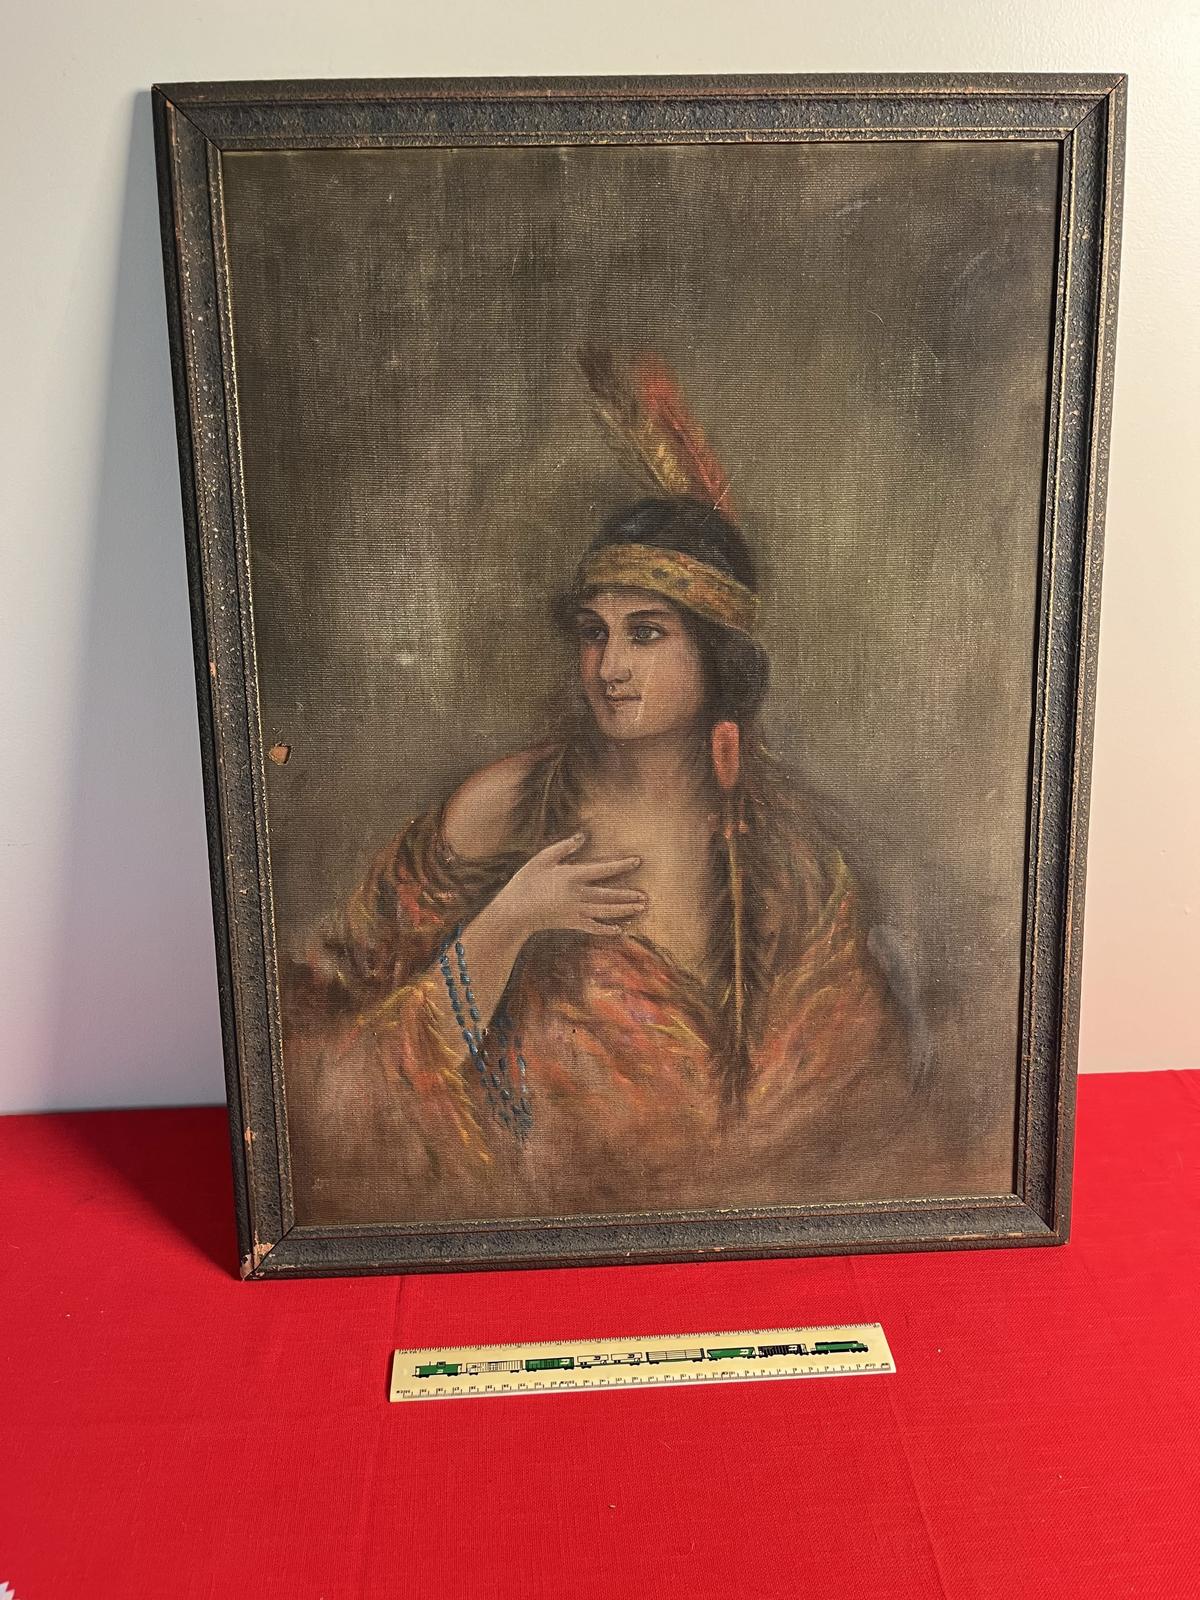 Native American Maiden Painting On Canvas